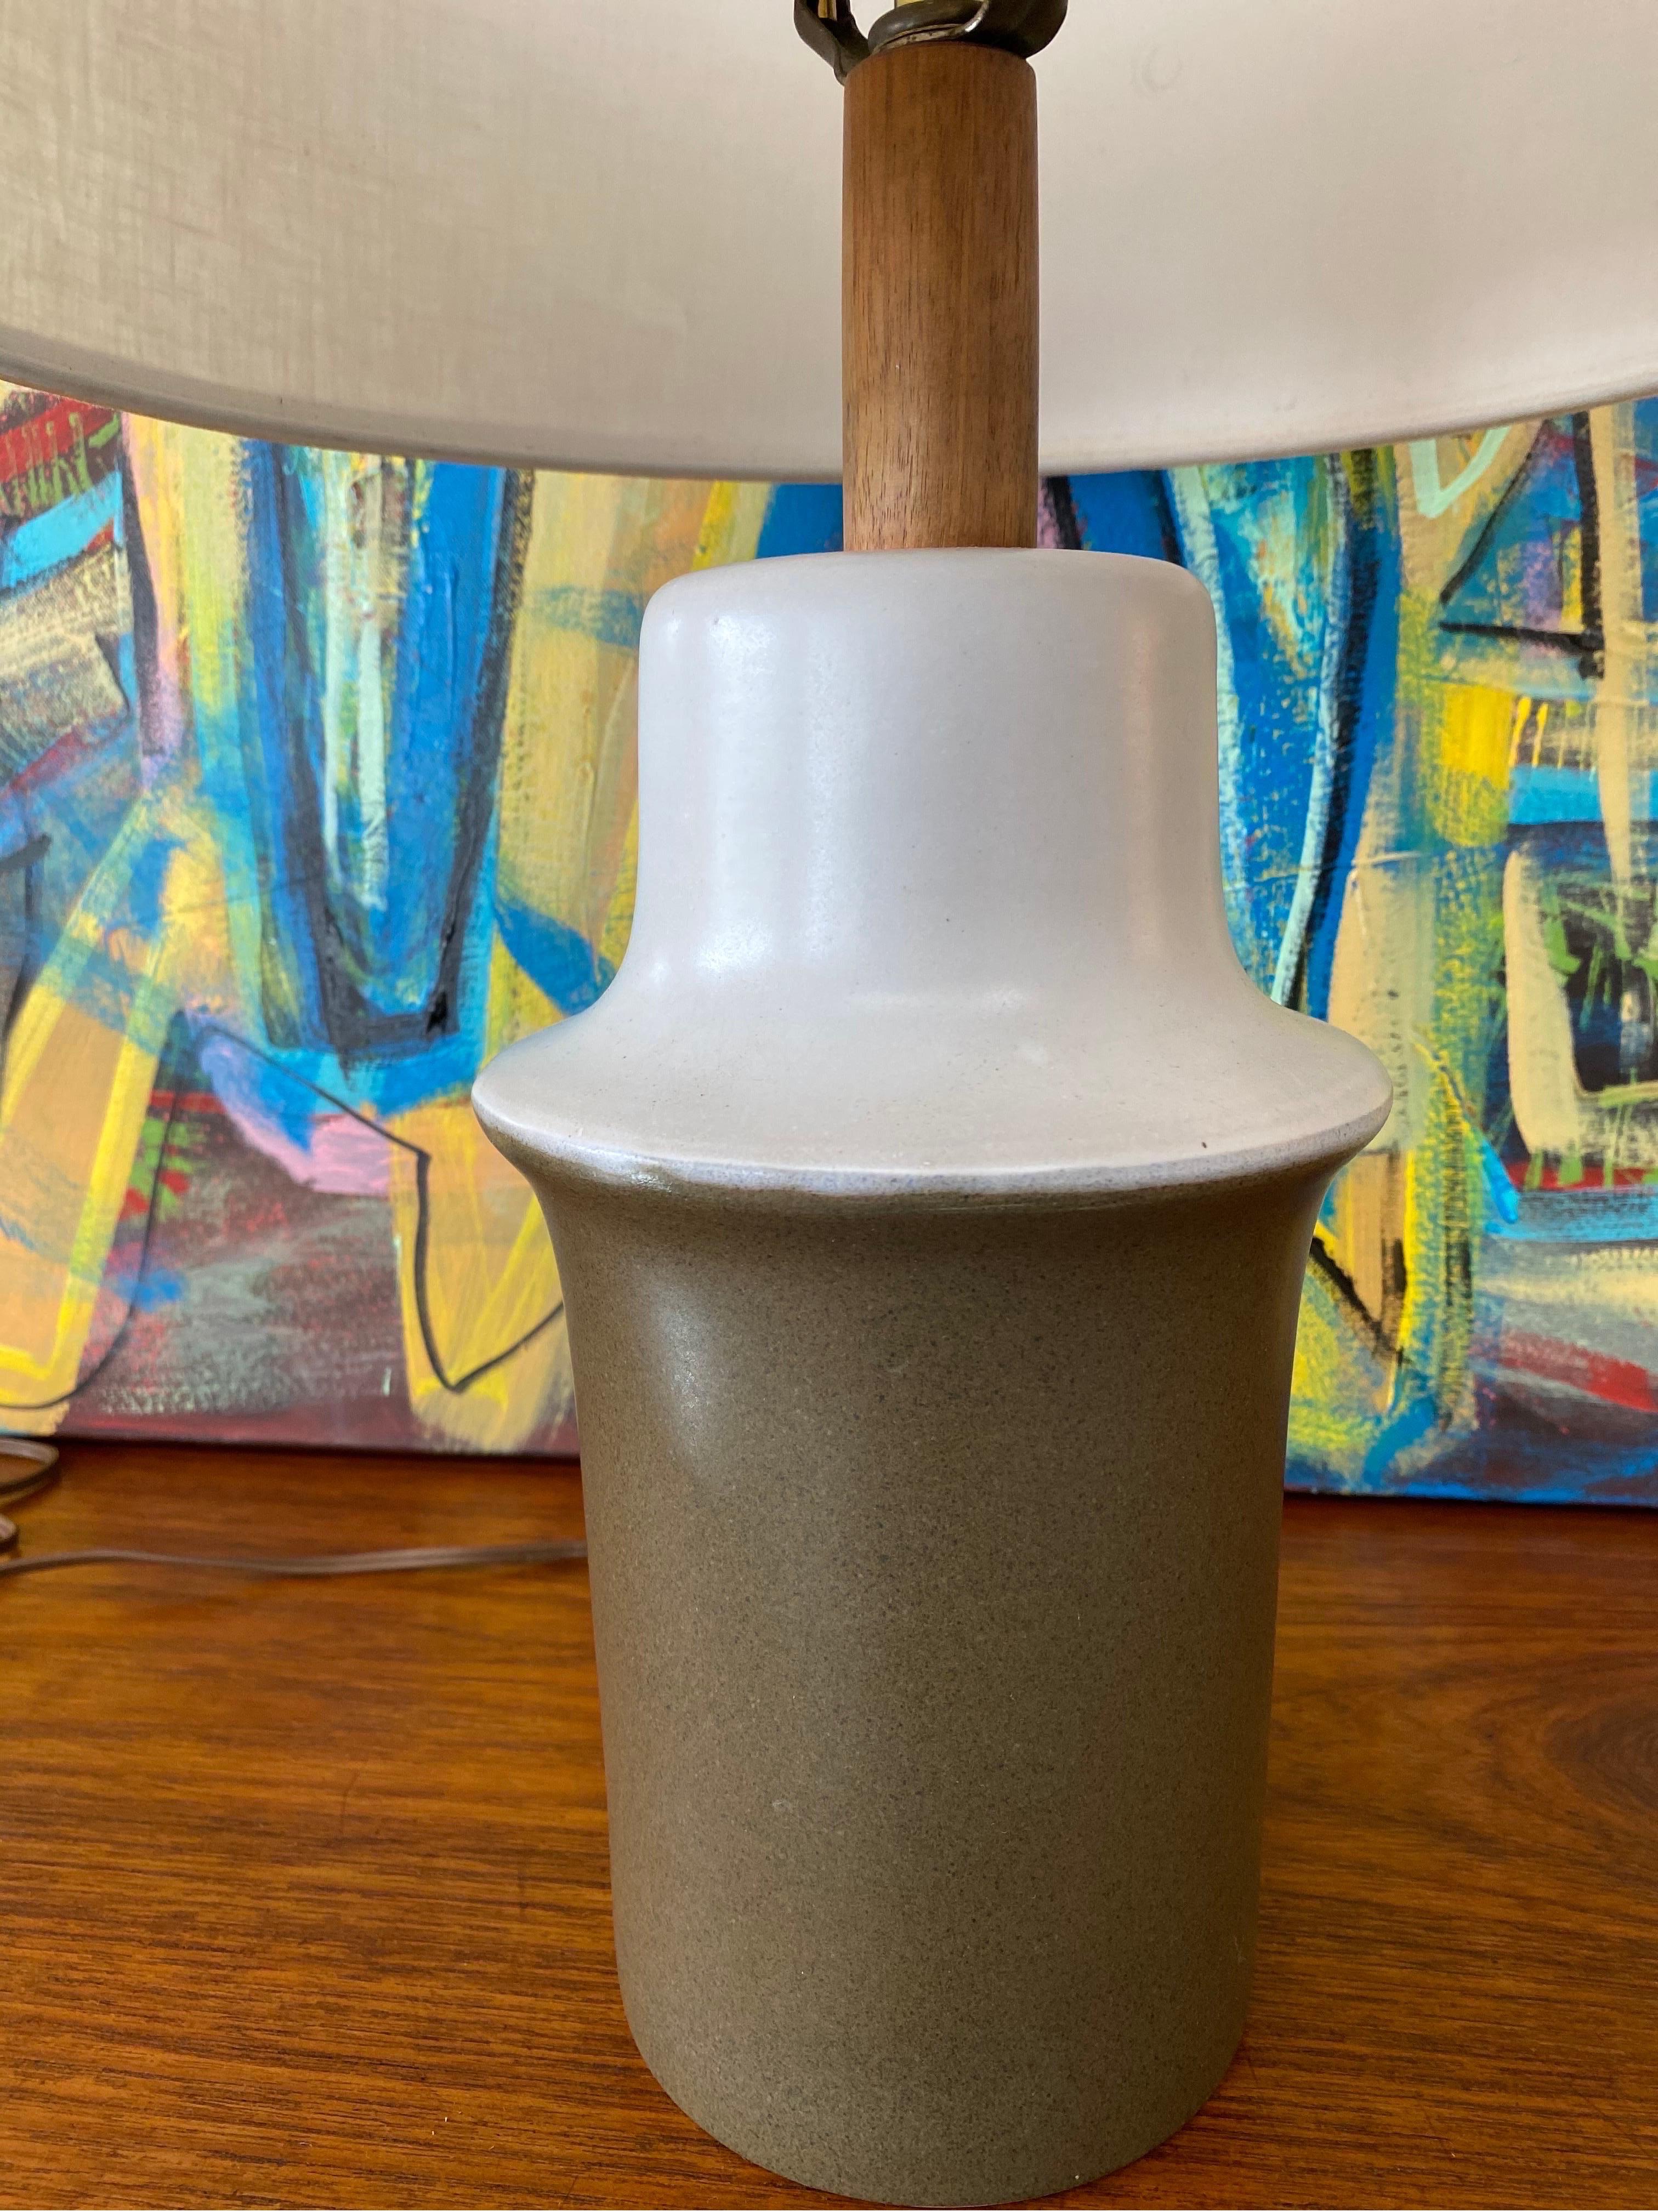 Mid-century modern table lamp by Gordon & Jane Martz, circa 1960s. This vintage ceramic lamp features earthy colors and has a teak finial and mounting and measures at the widest point (in the middle of the base) 6.50